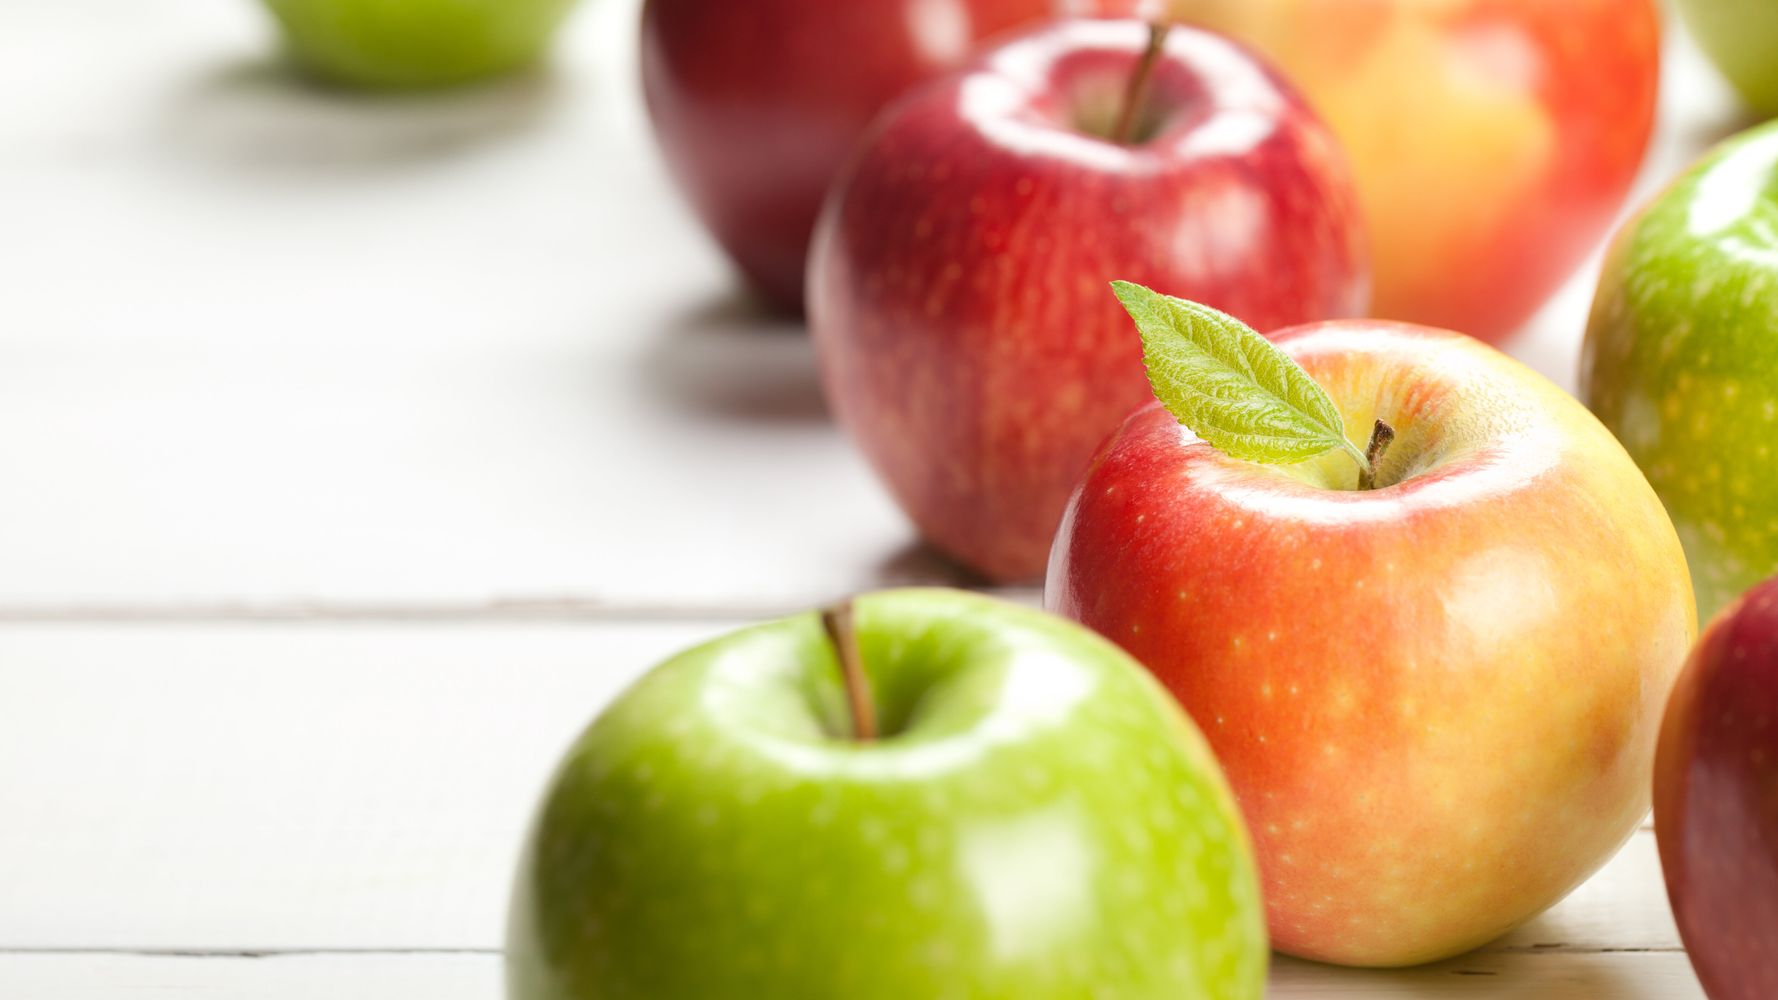 Apple Nutrition - Red and Green Apple Nutrition Facts